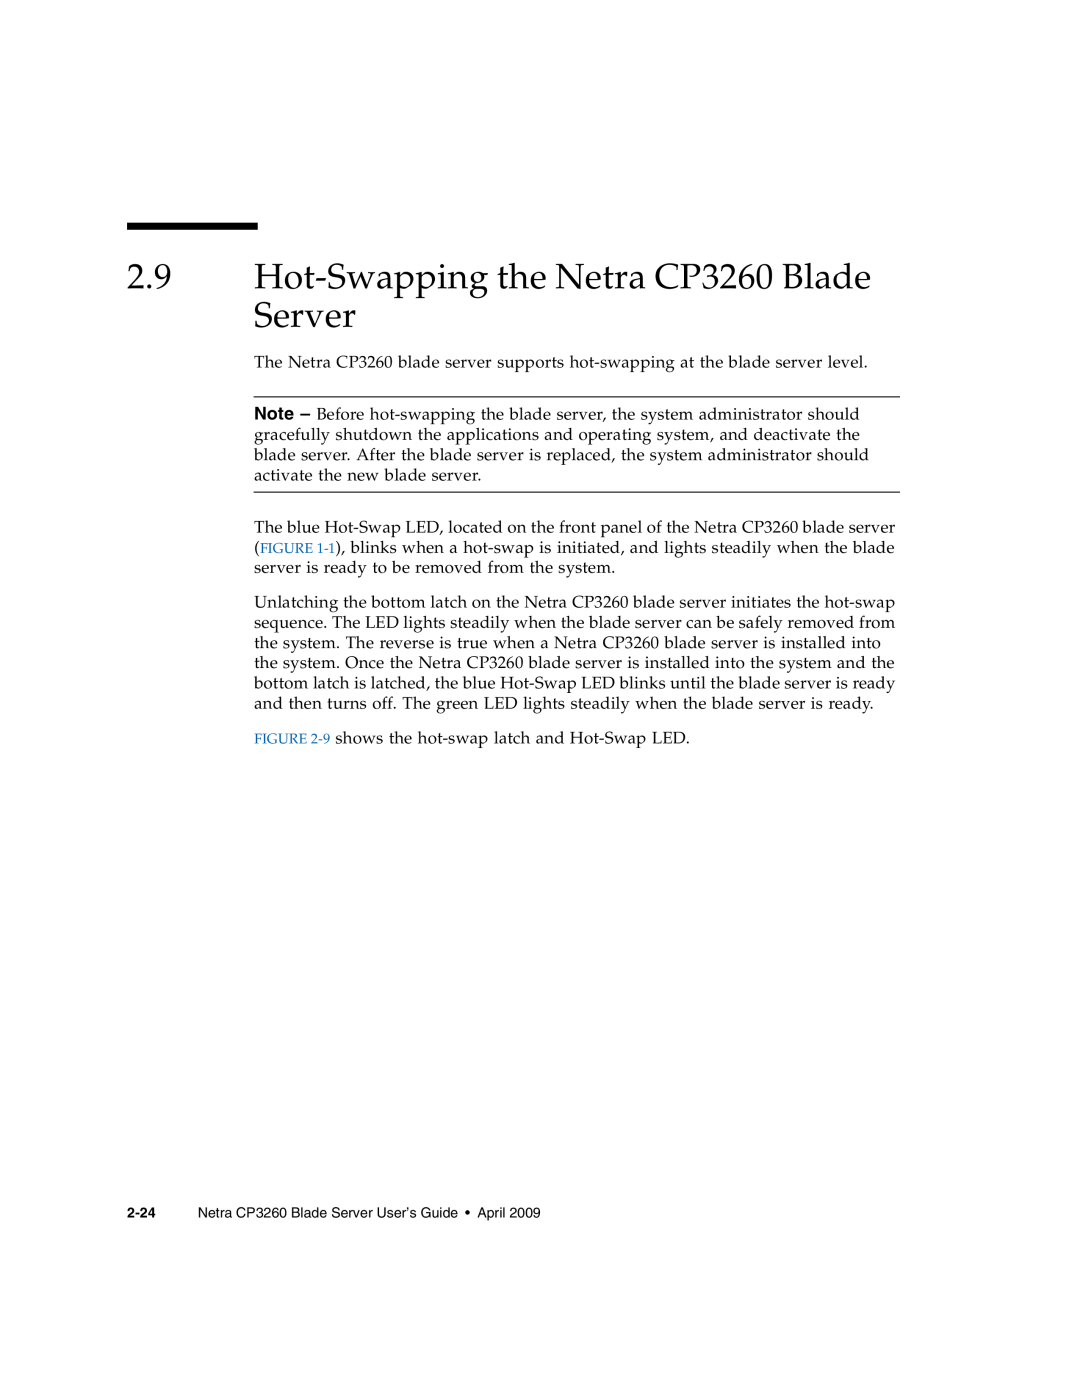 Sun Microsystems manual Hot-Swapping the Netra CP3260 Blade Server 